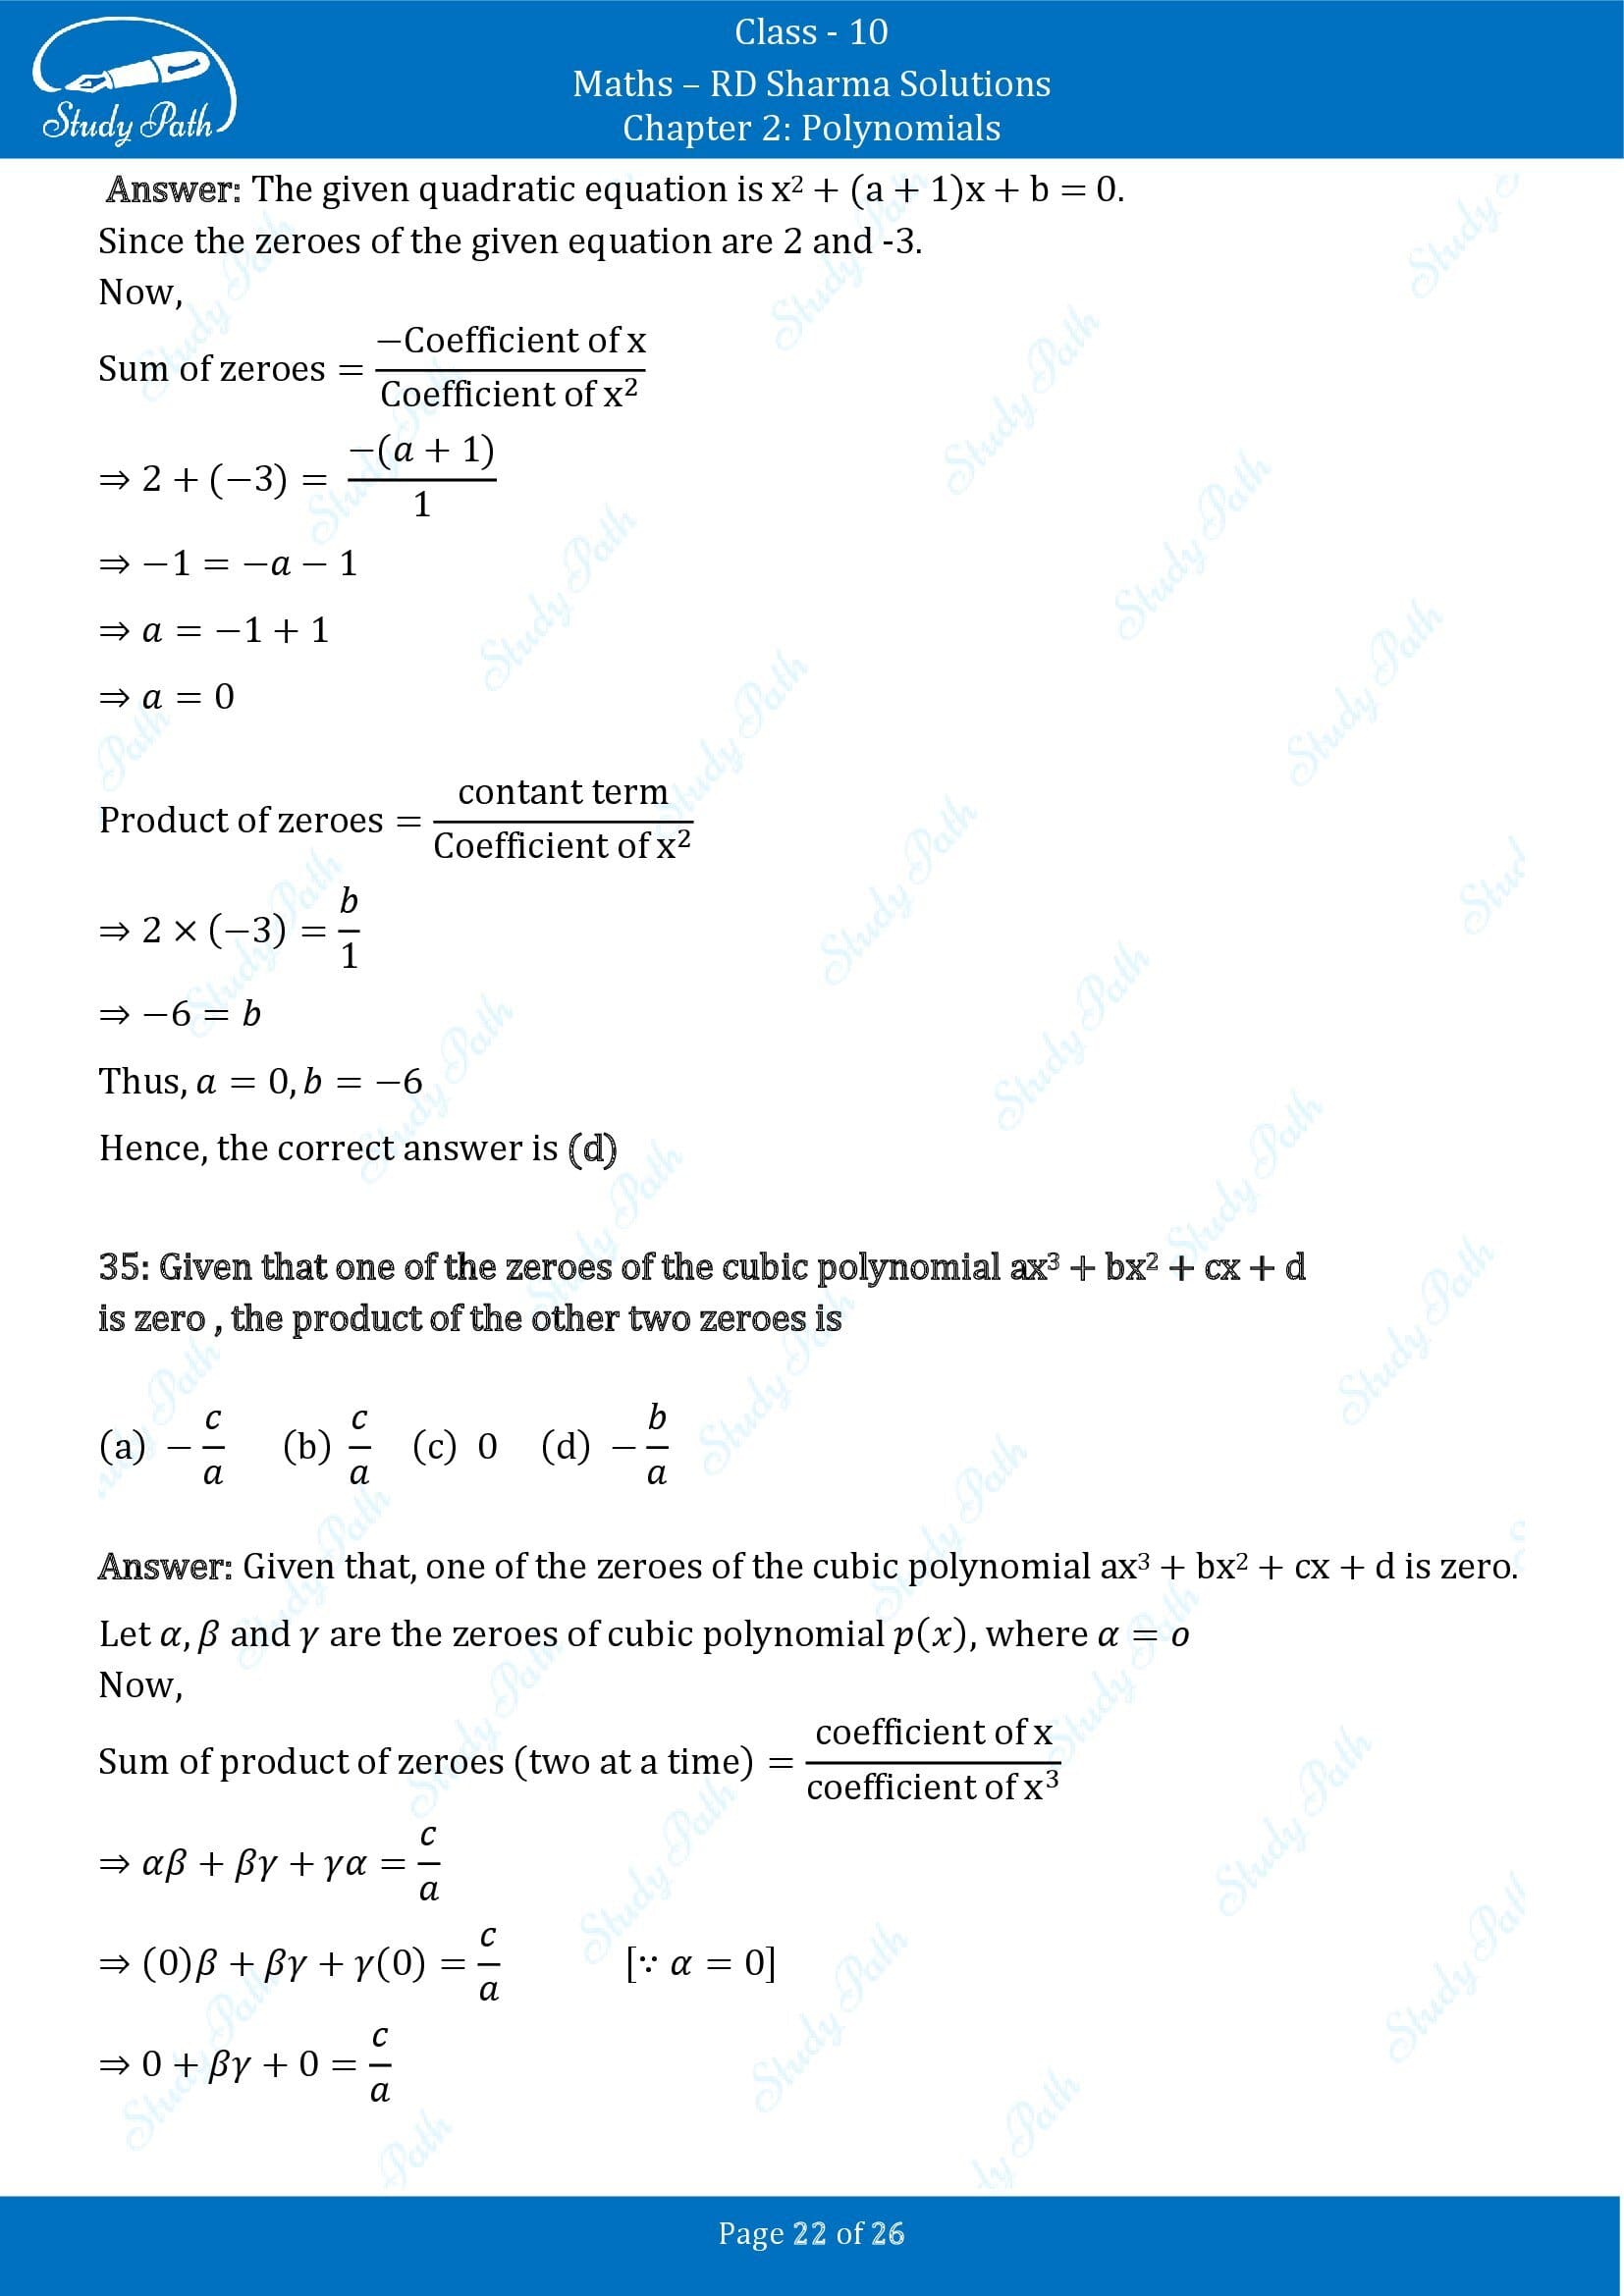 RD Sharma Solutions Class 10 Chapter 2 Polynomials Multiple Choice Questions MCQs 00022